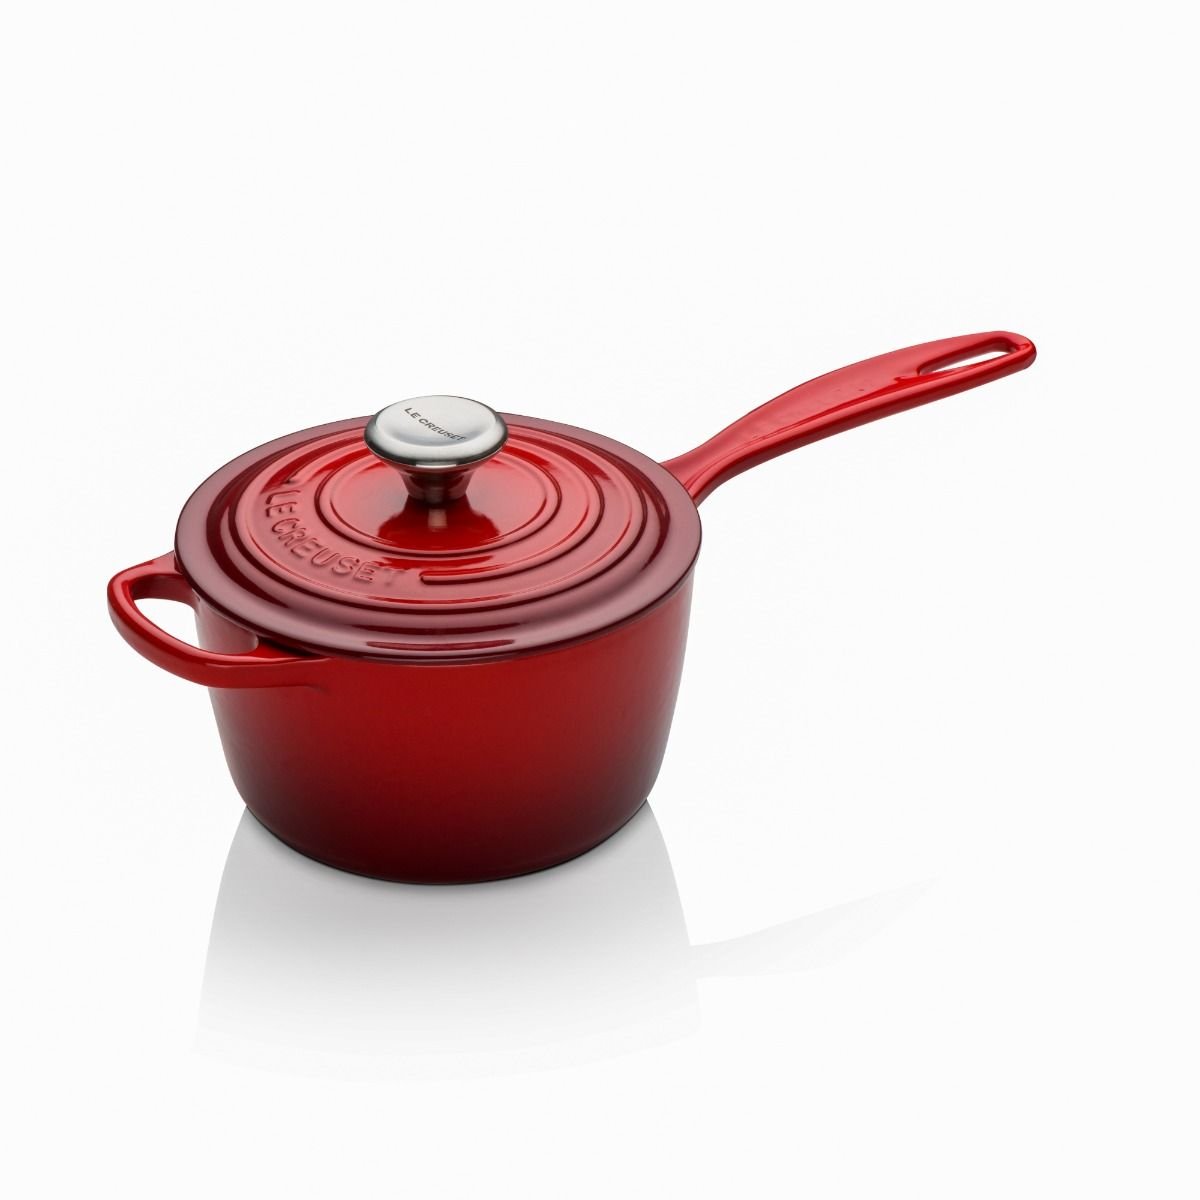 Le Creuset Signature Cast Iron 9” Skillet Cerise Red New In Box Made In  France